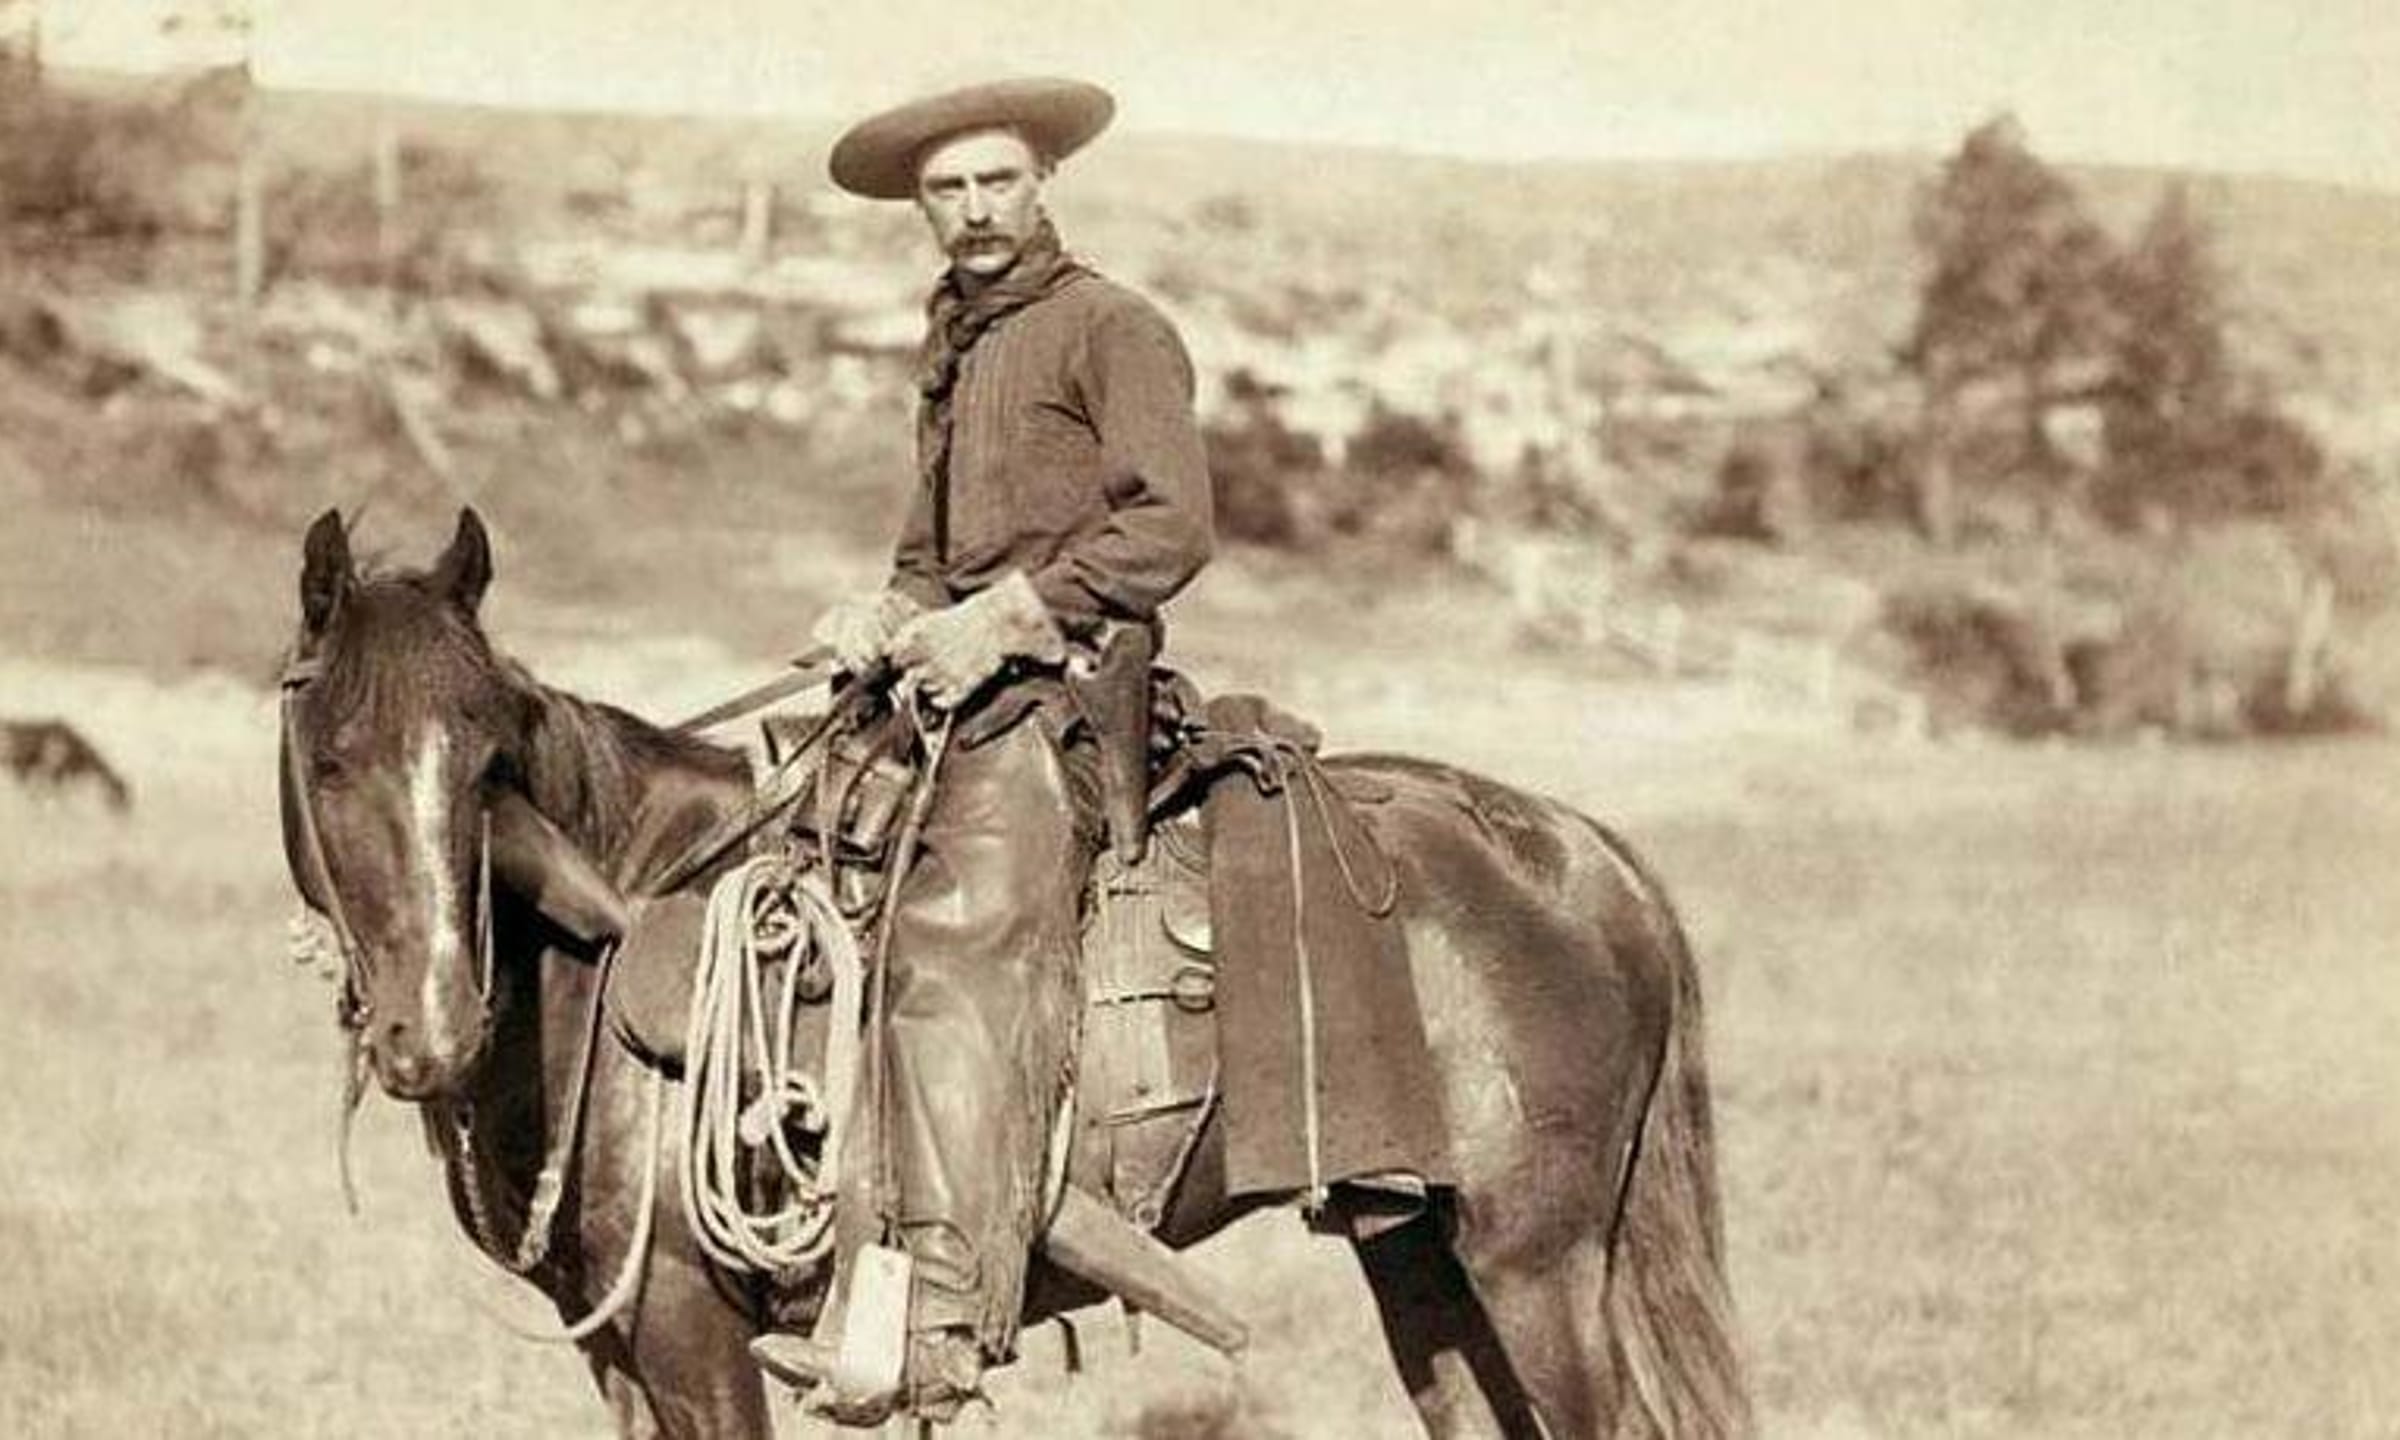 What Was It Really Like To Be A Cowboy In The Wild West?